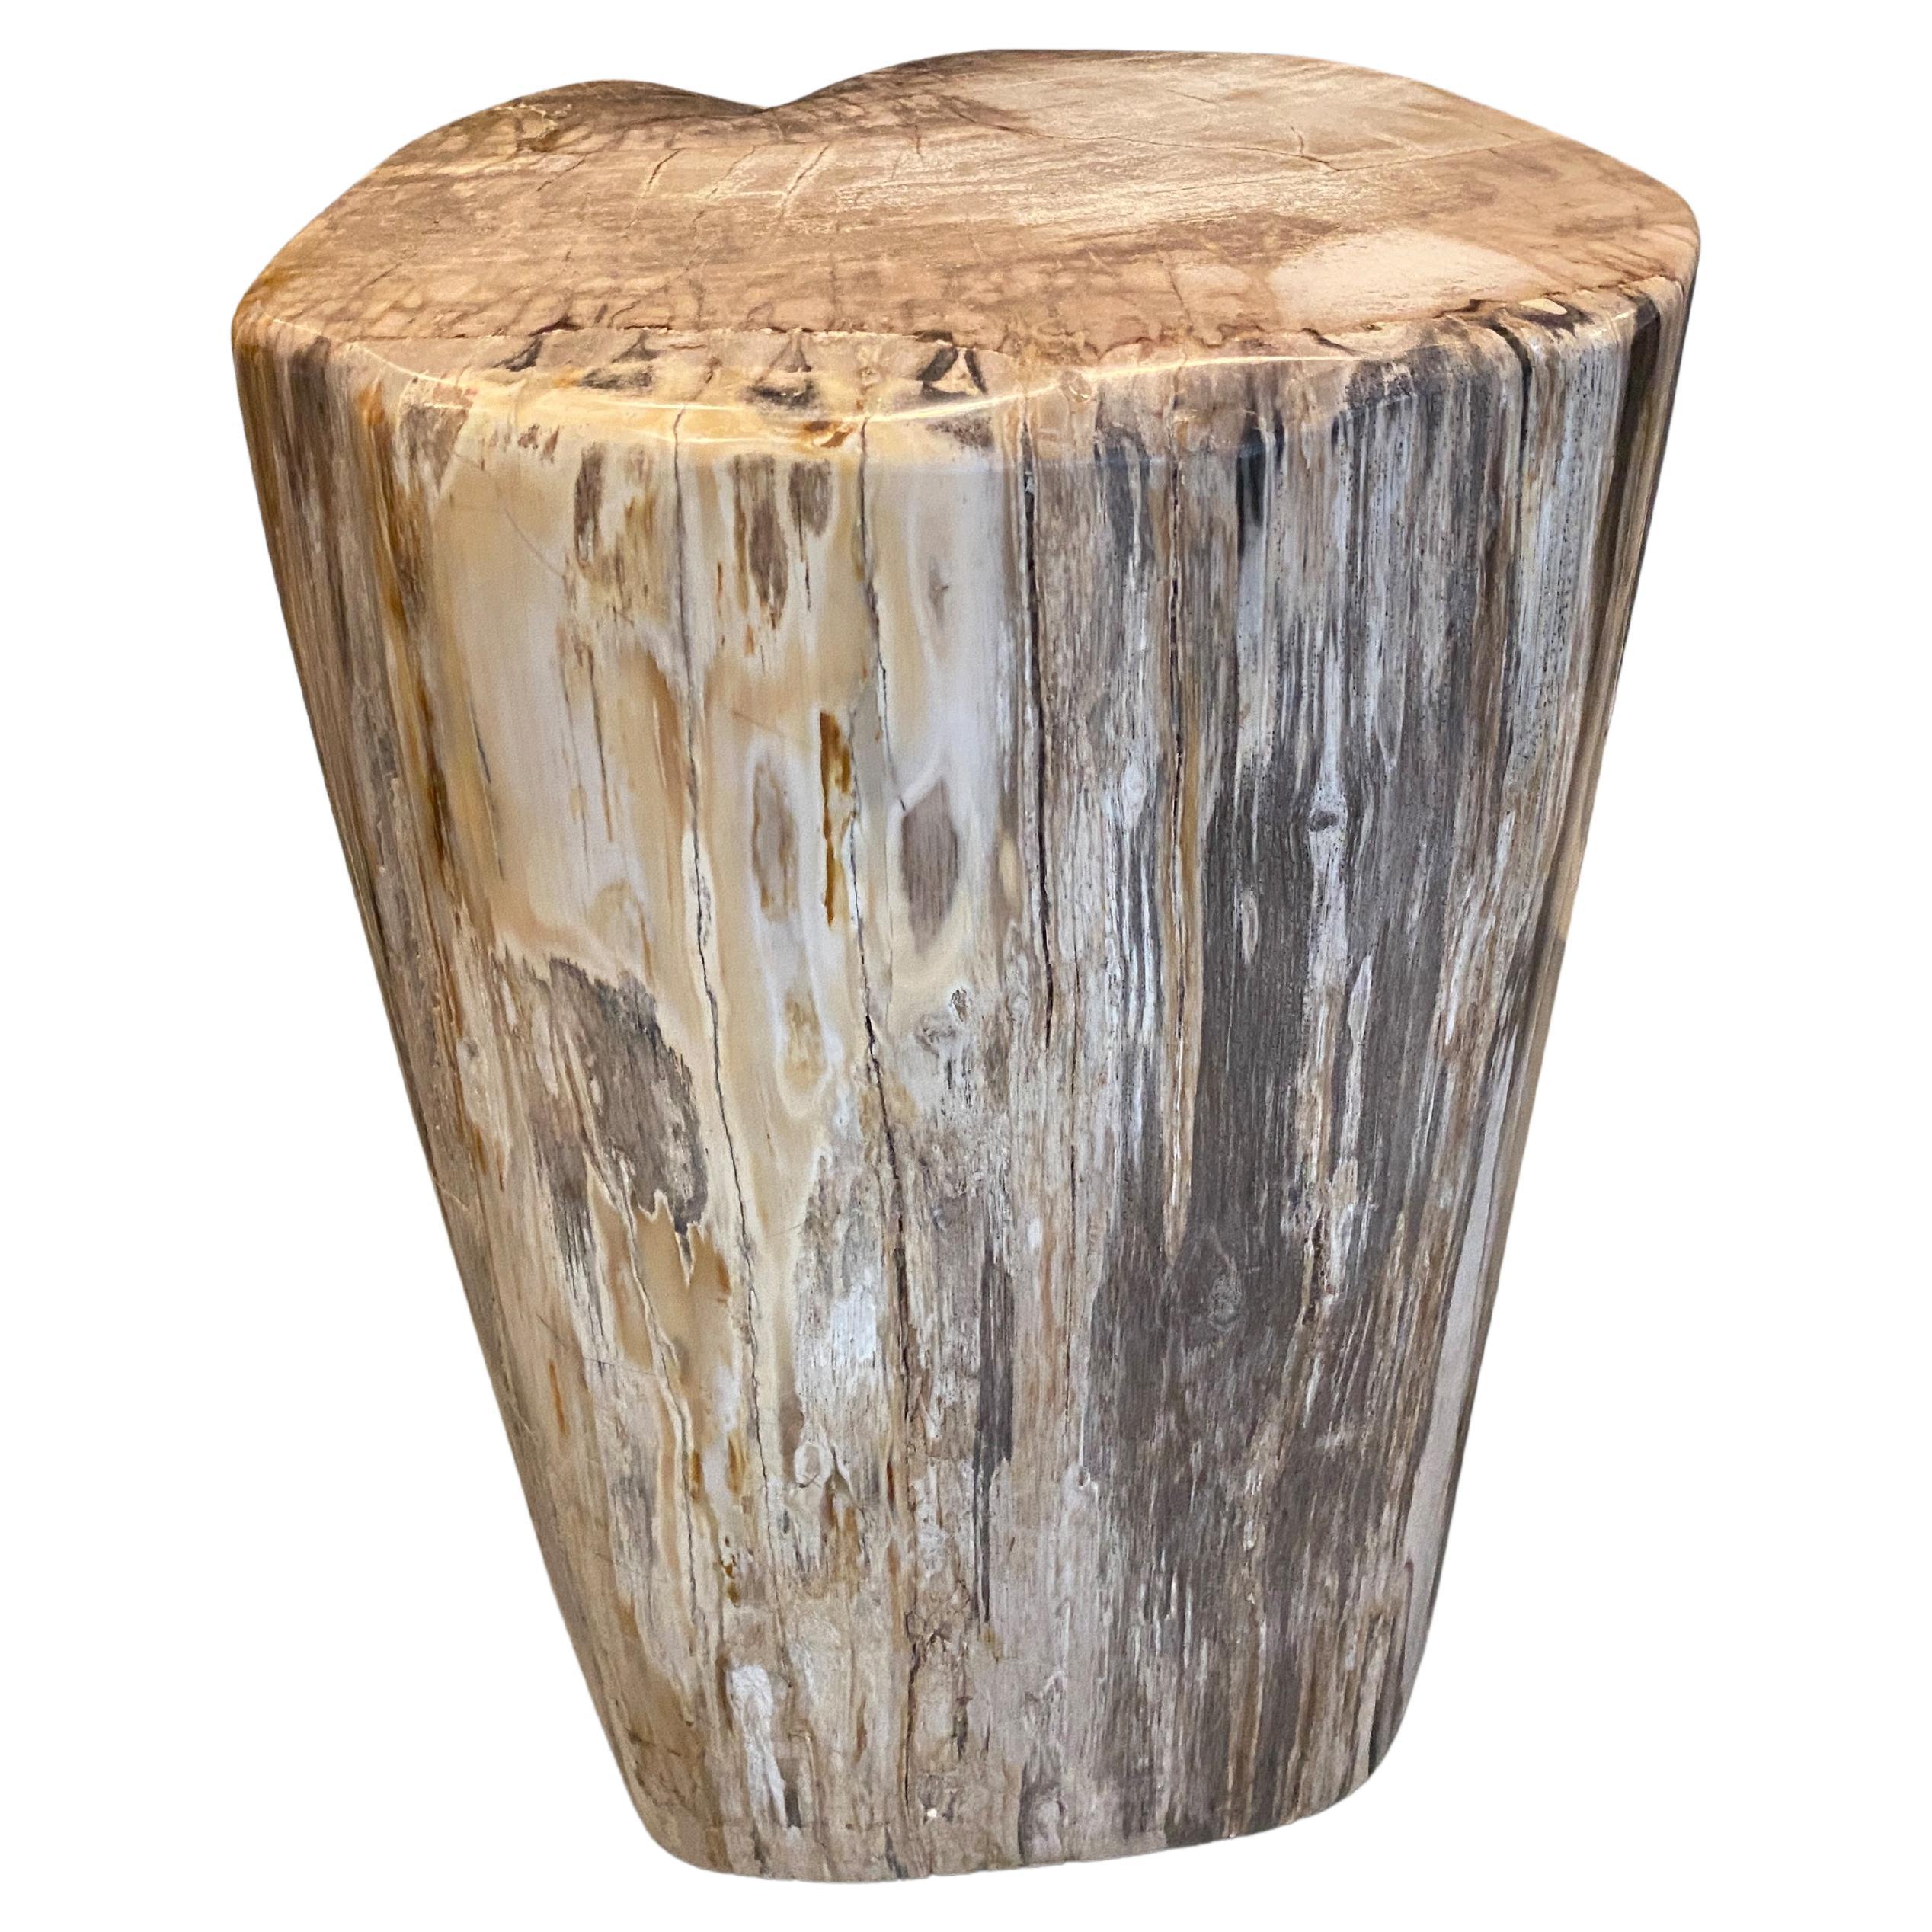 Andrianna Shamaris High Quality Petrified Wood Pedestal or Side Table For Sale